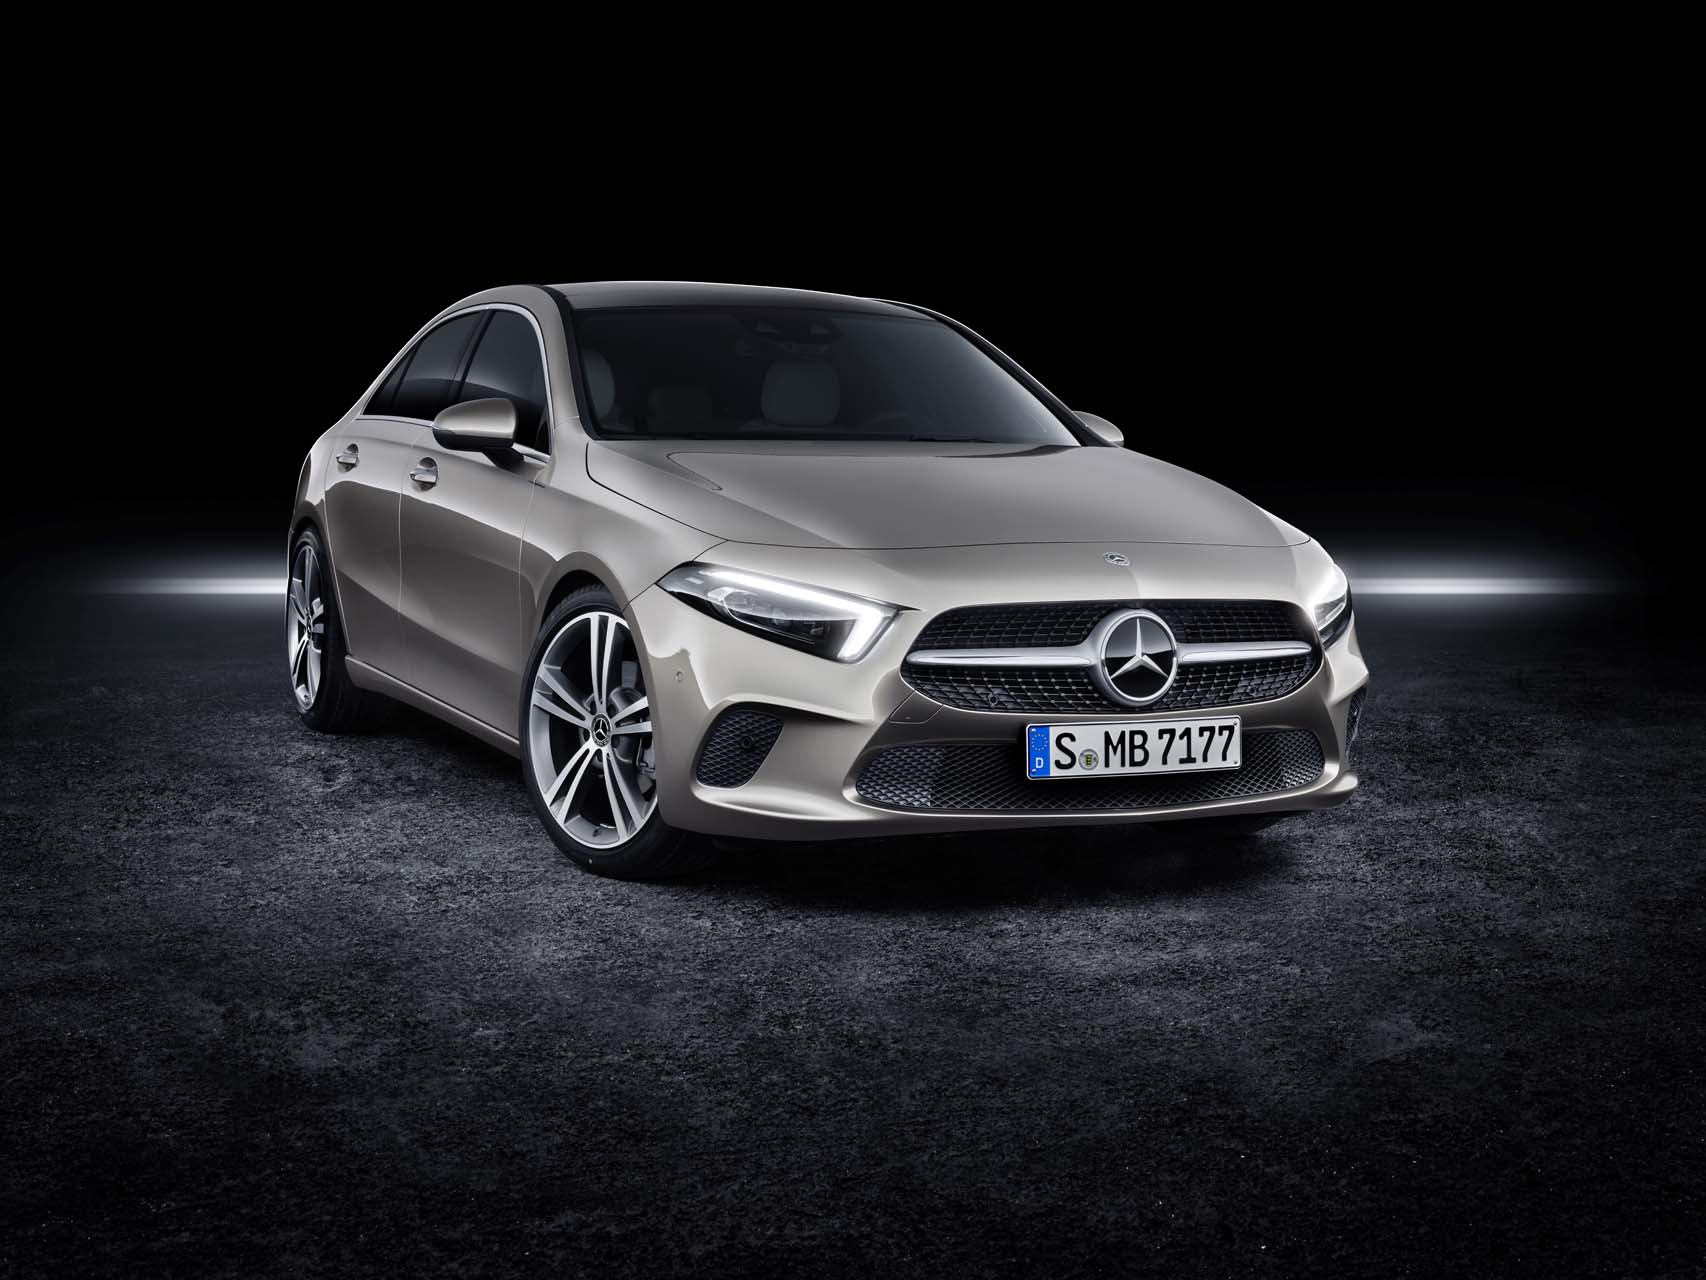 Mercedes-Benz A250e in the works to join plug-in hybrid lineup